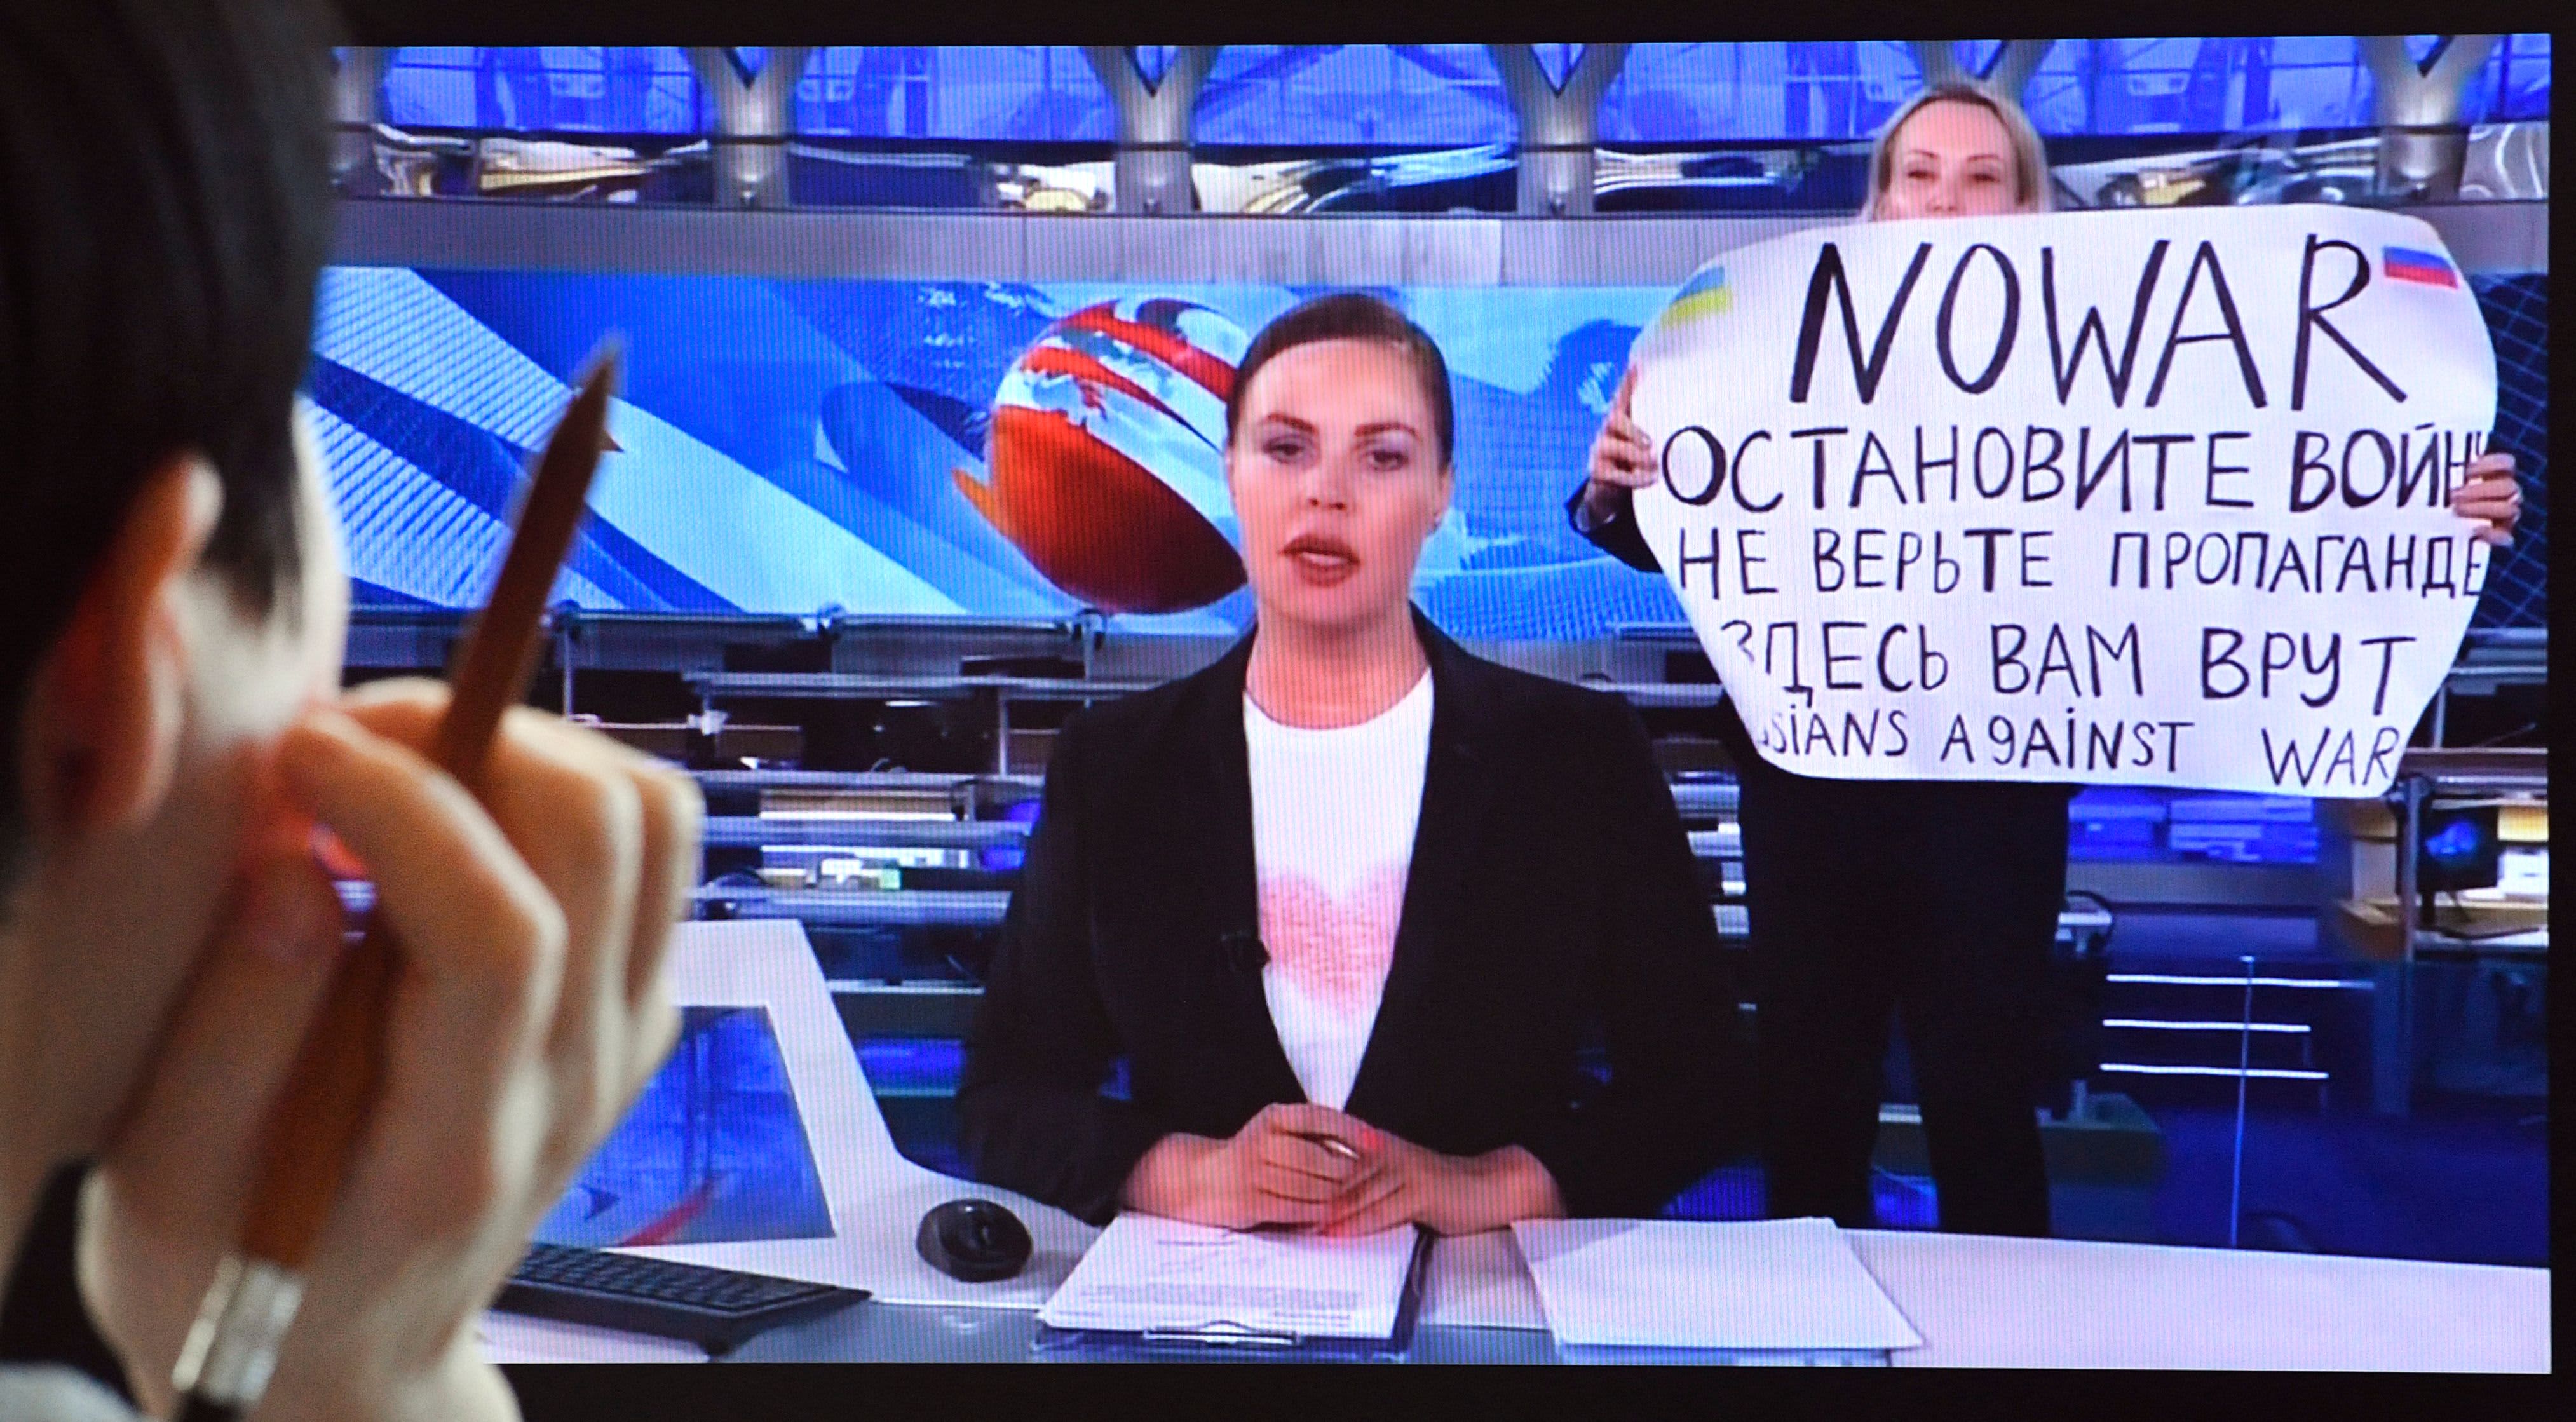 Journalist who protested Ukraine war on Russian state TV is fined 0